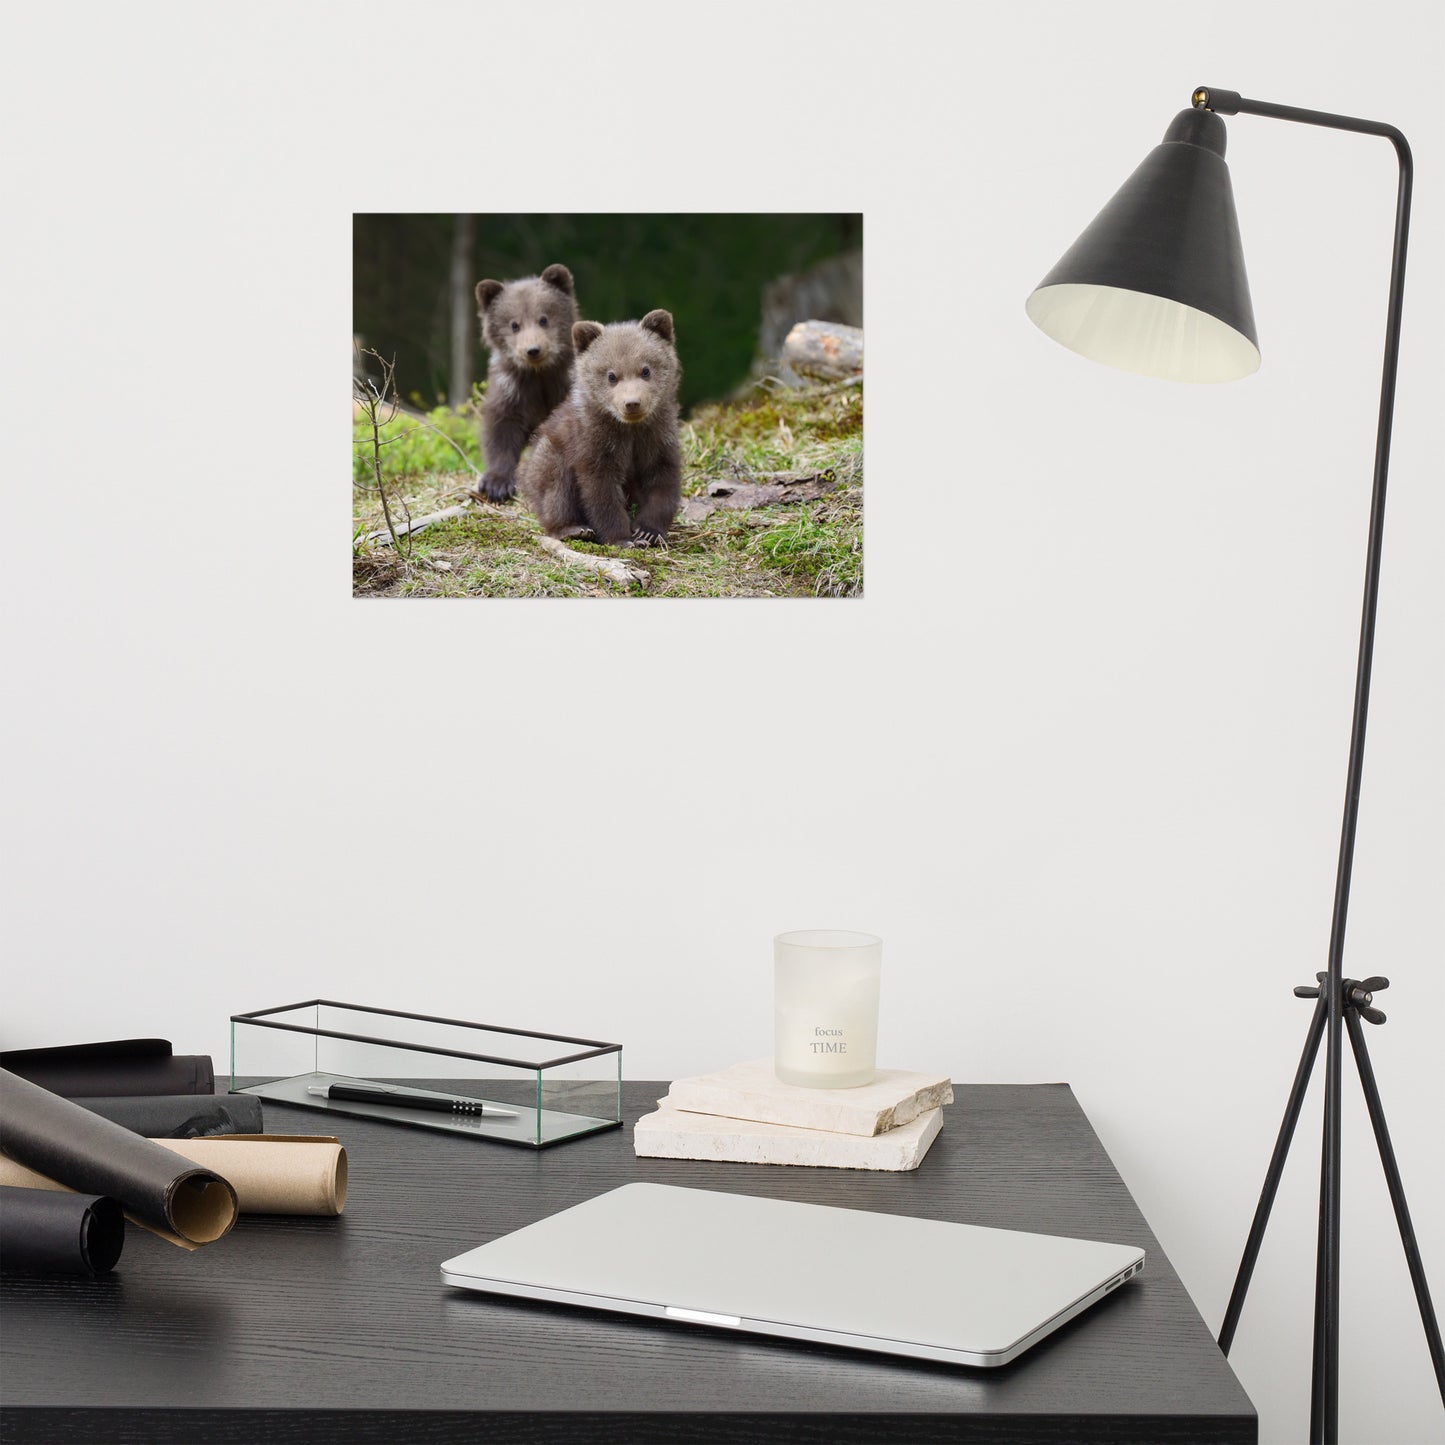 Childrens Wall Art Prints: Adorable Grizzly Bear Cubs In The Trees Animal / Wildlife / Nature Photograph - Loose / Unframed / Frameable / Frameless Wall Art Print / Artwork